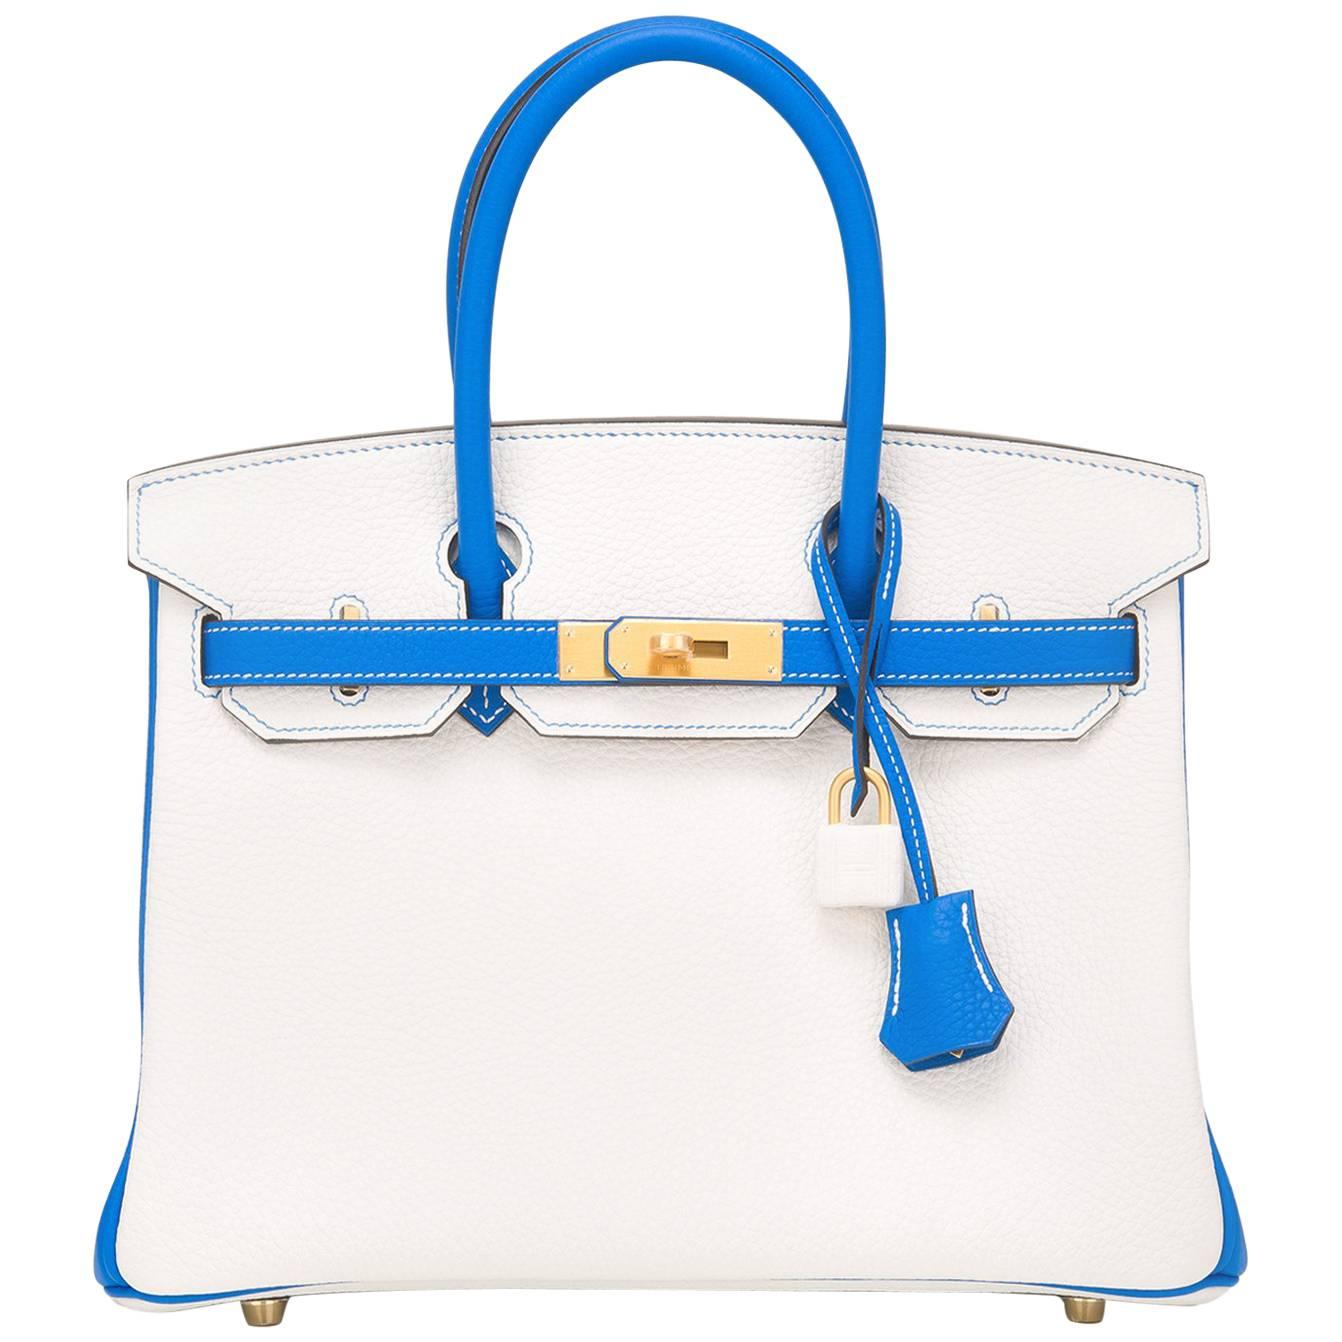 Hermes HSS White And Blue Hydra Clemence Birkin 30cm Brushed Gold Hardware For Sale